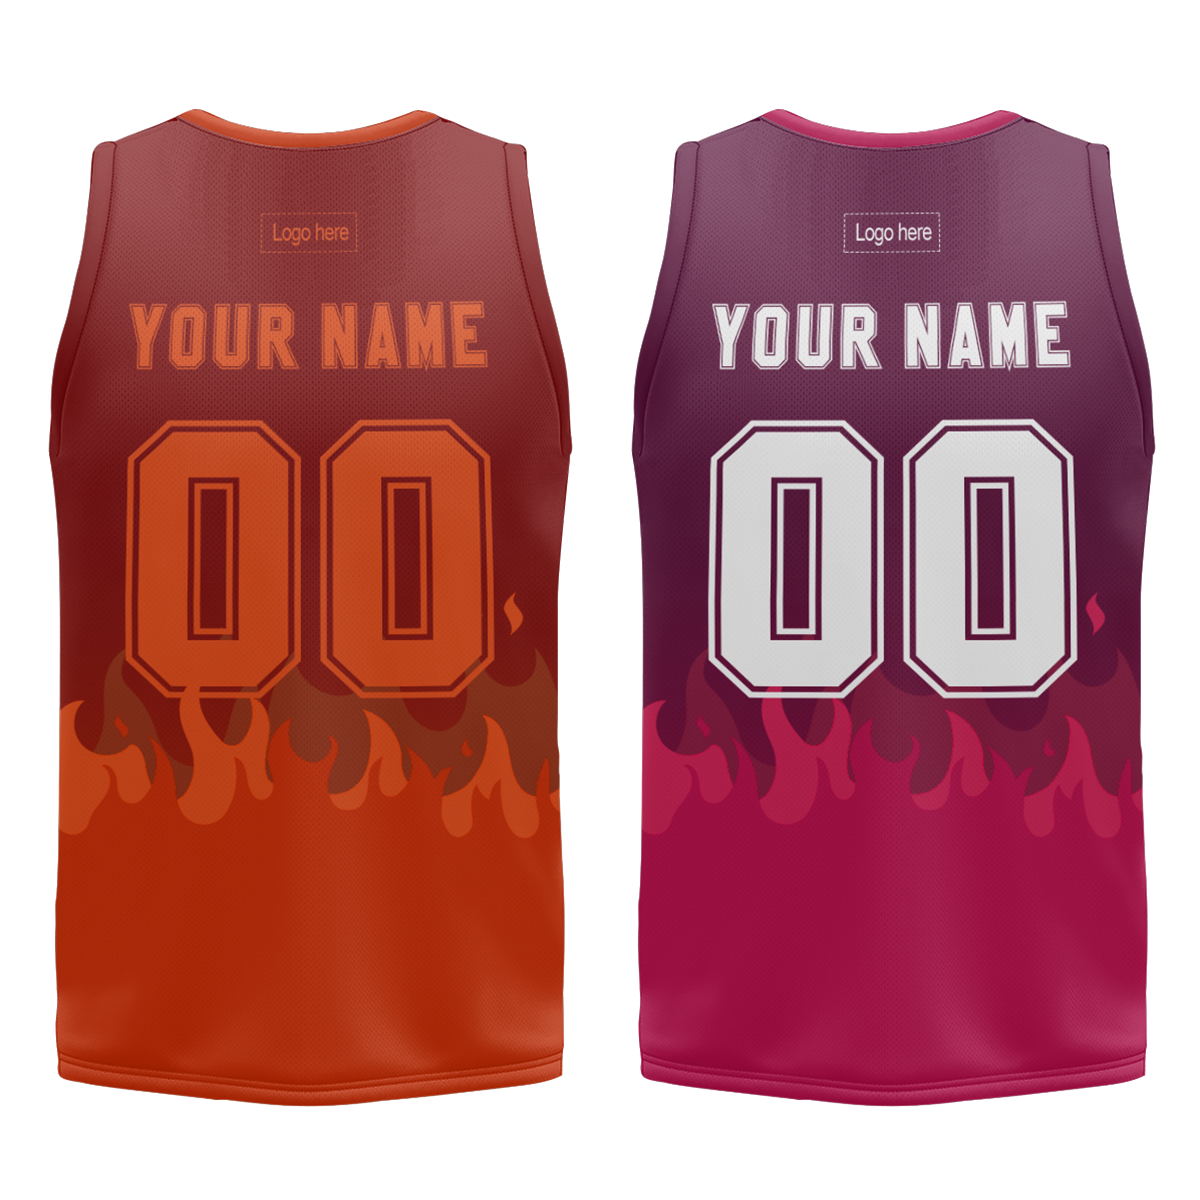 wholesale-new-blank-team-basketball-jerseys-printing-design-your-own-basketball-uniforms-for-men-and-women-at-cj-pod-6